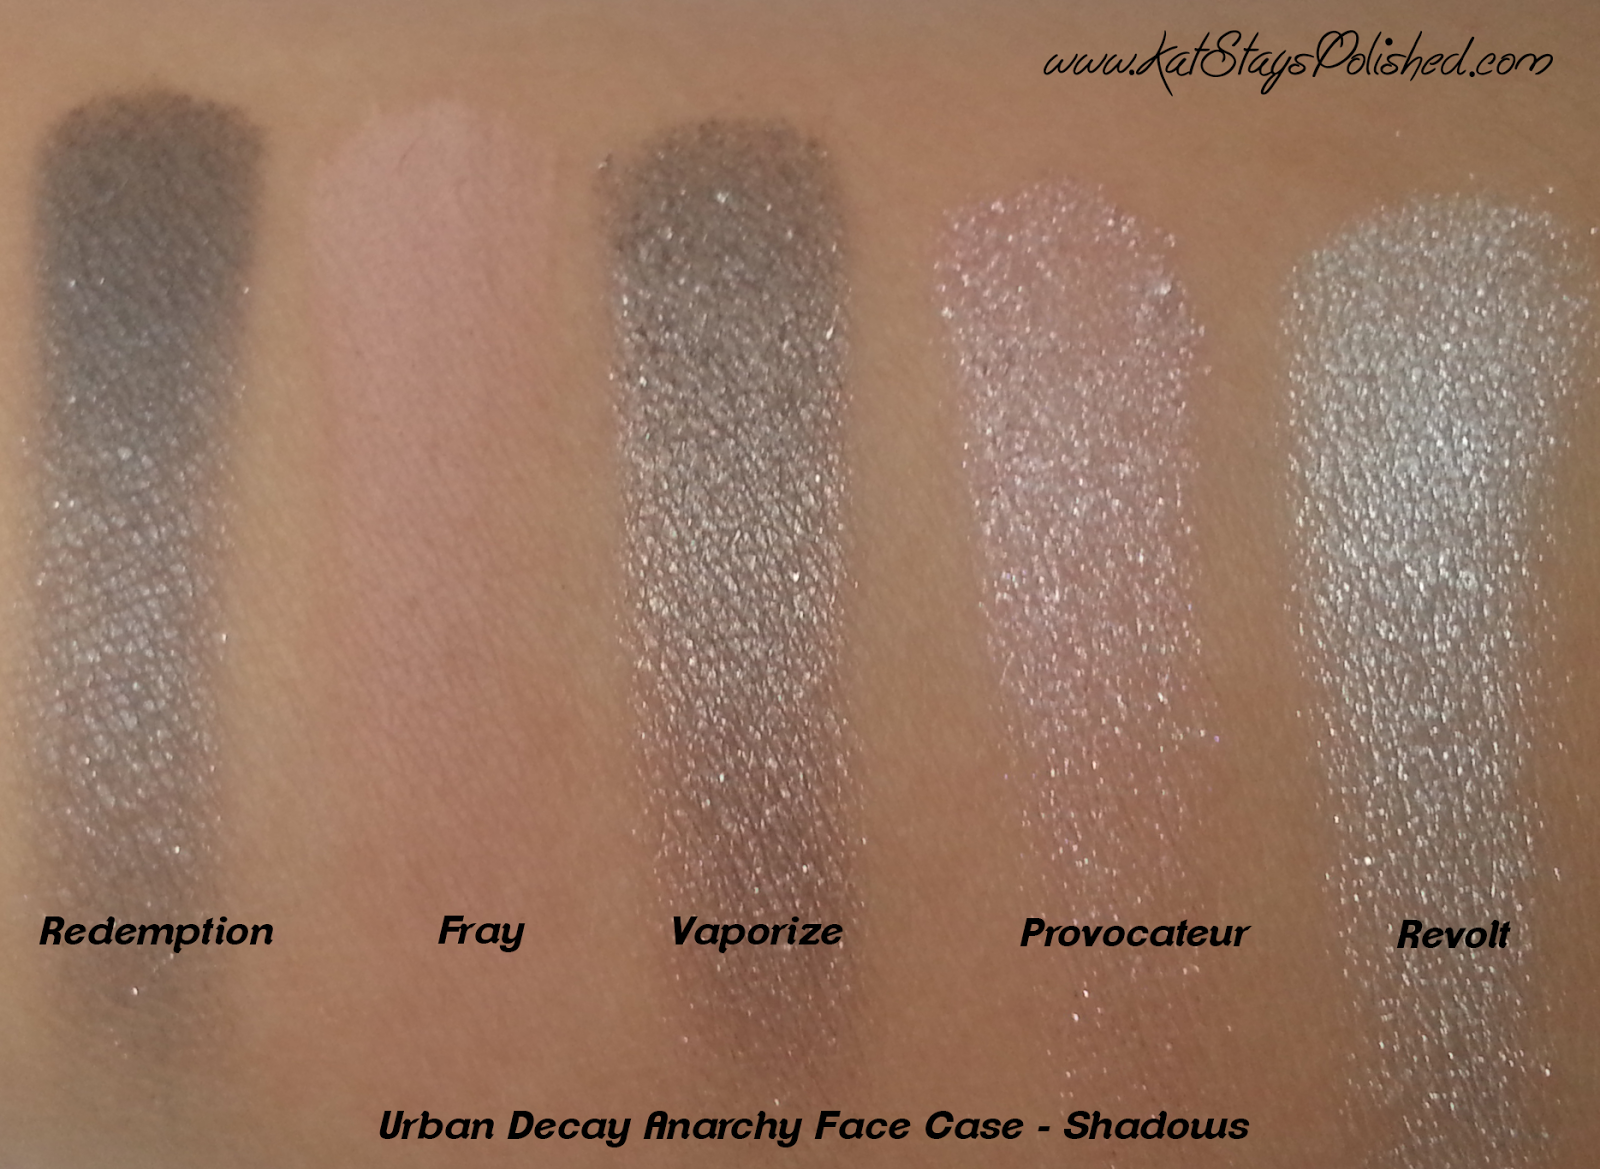 Urban Decay Anarchy Face Case - Shadow Swatches